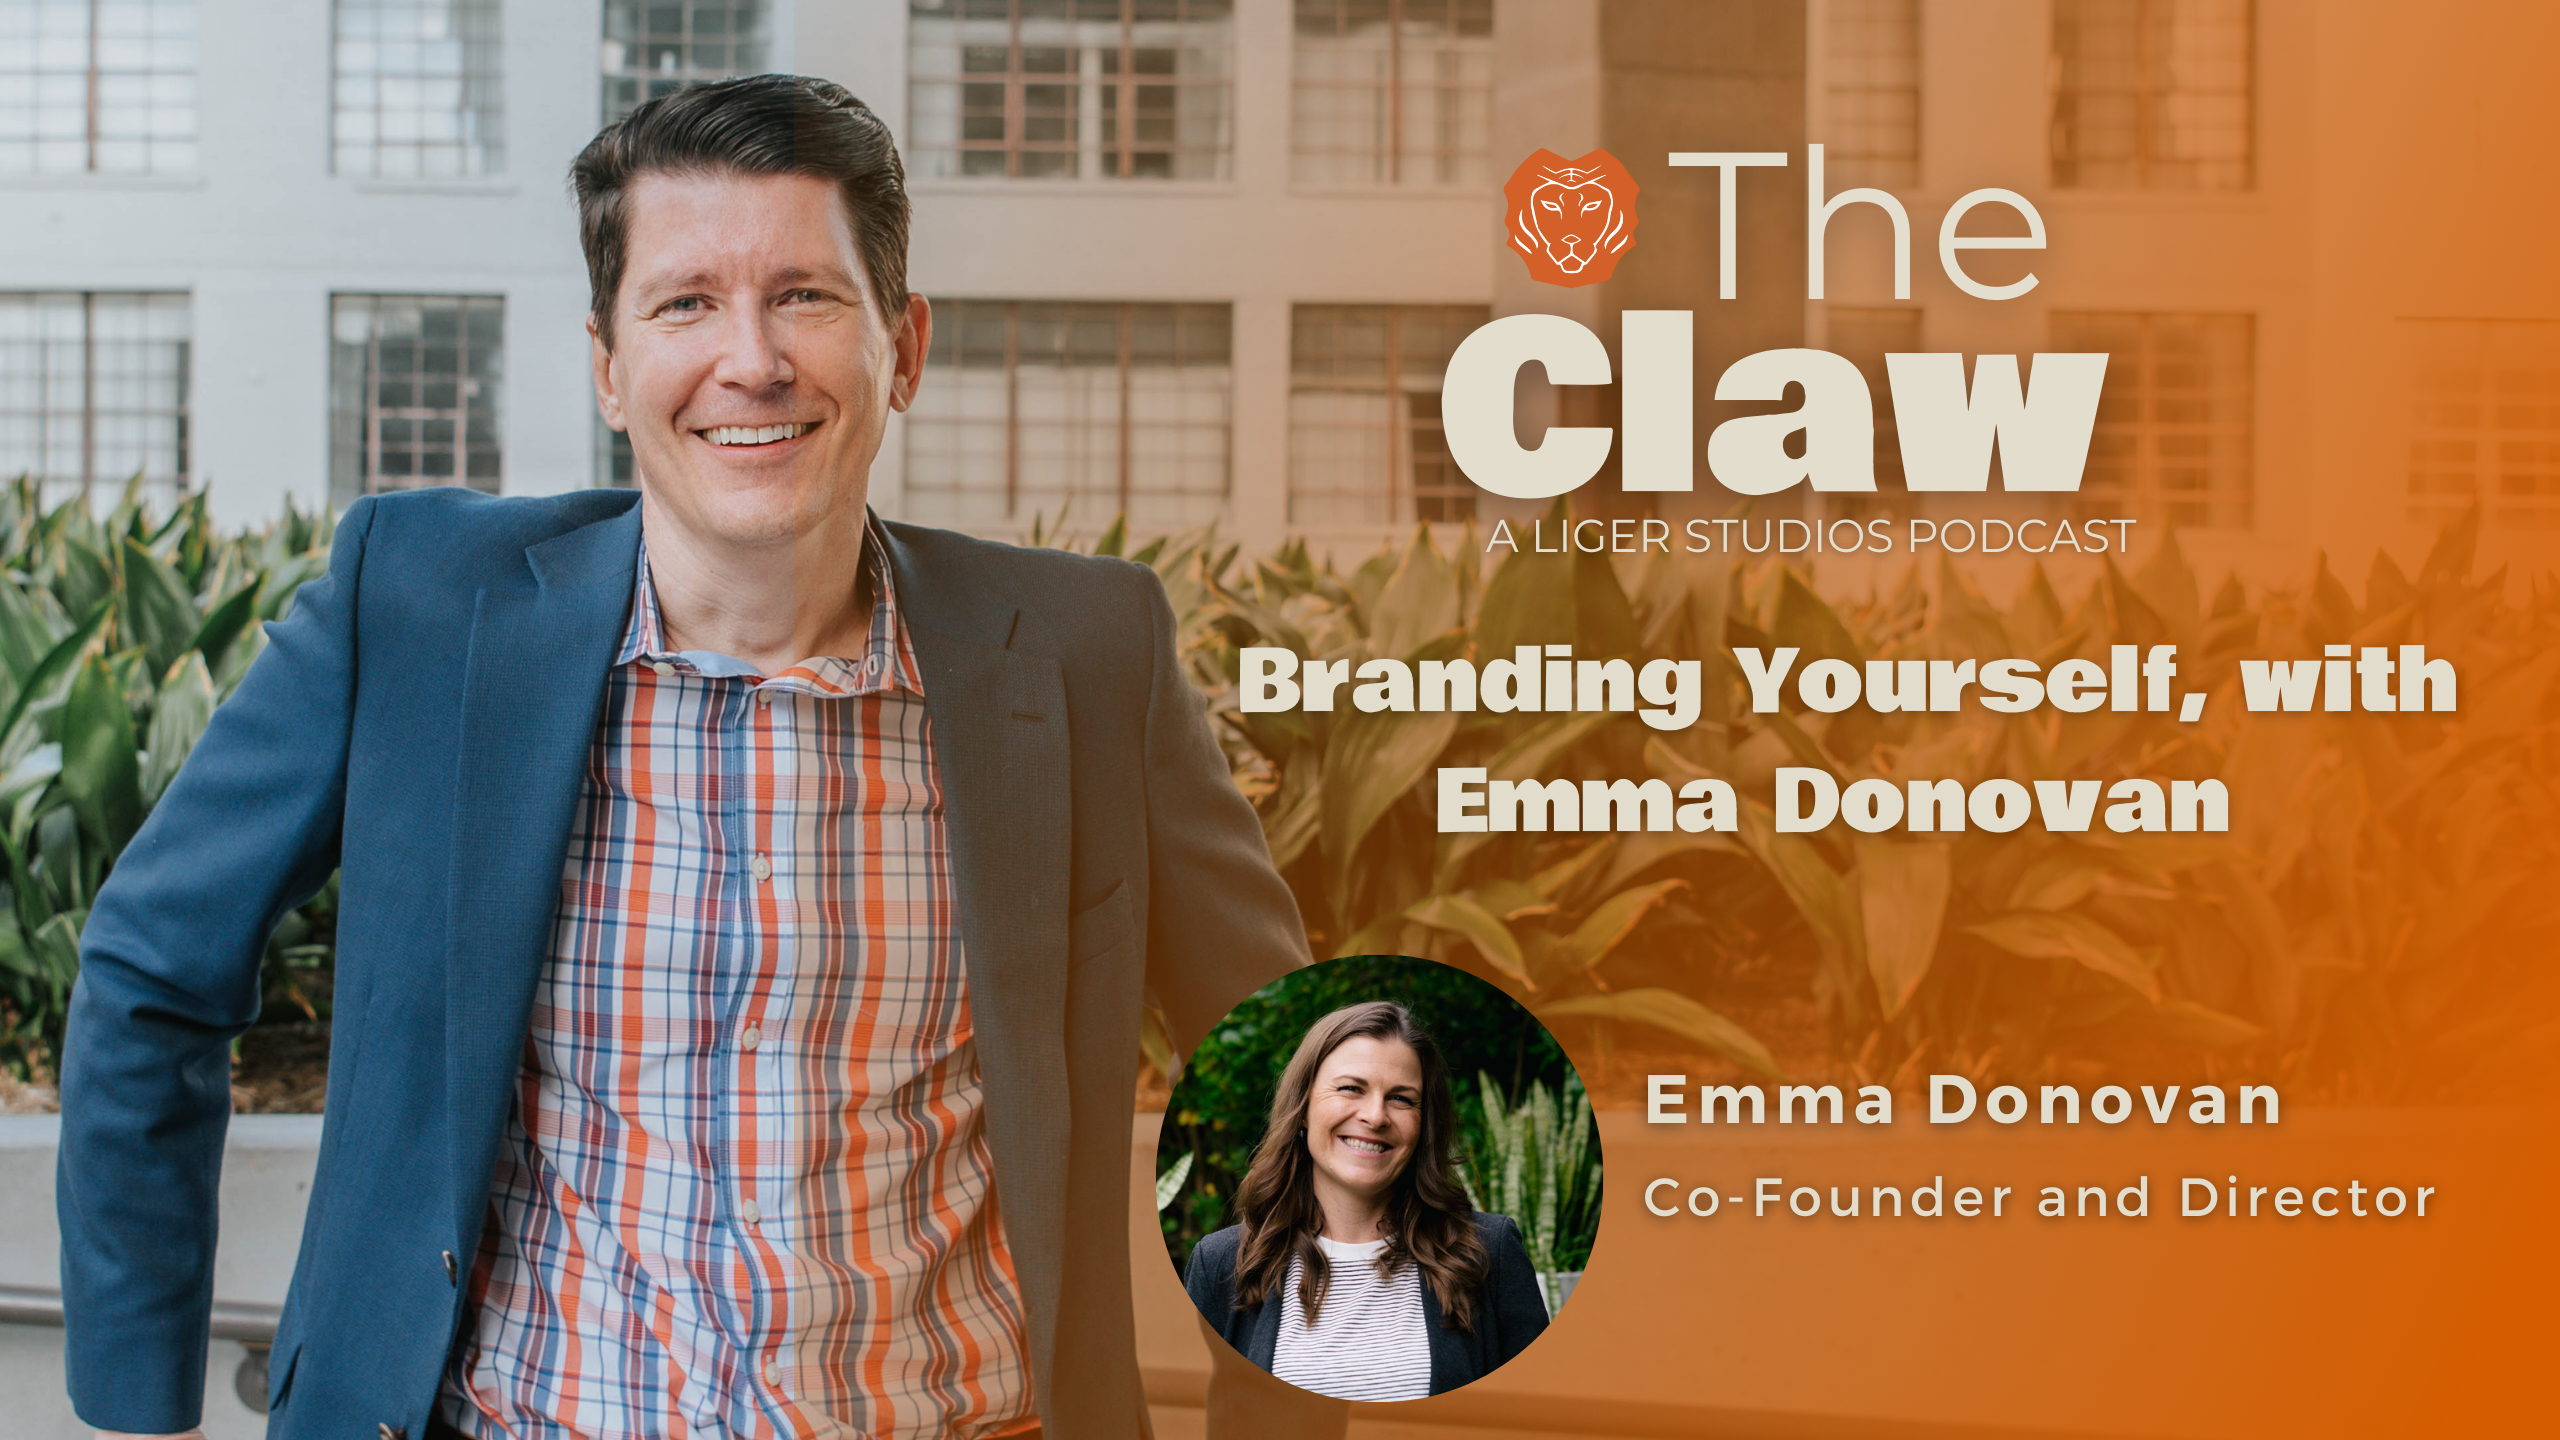 The Claw Podcast: Branding Yourself with Emma Donovan